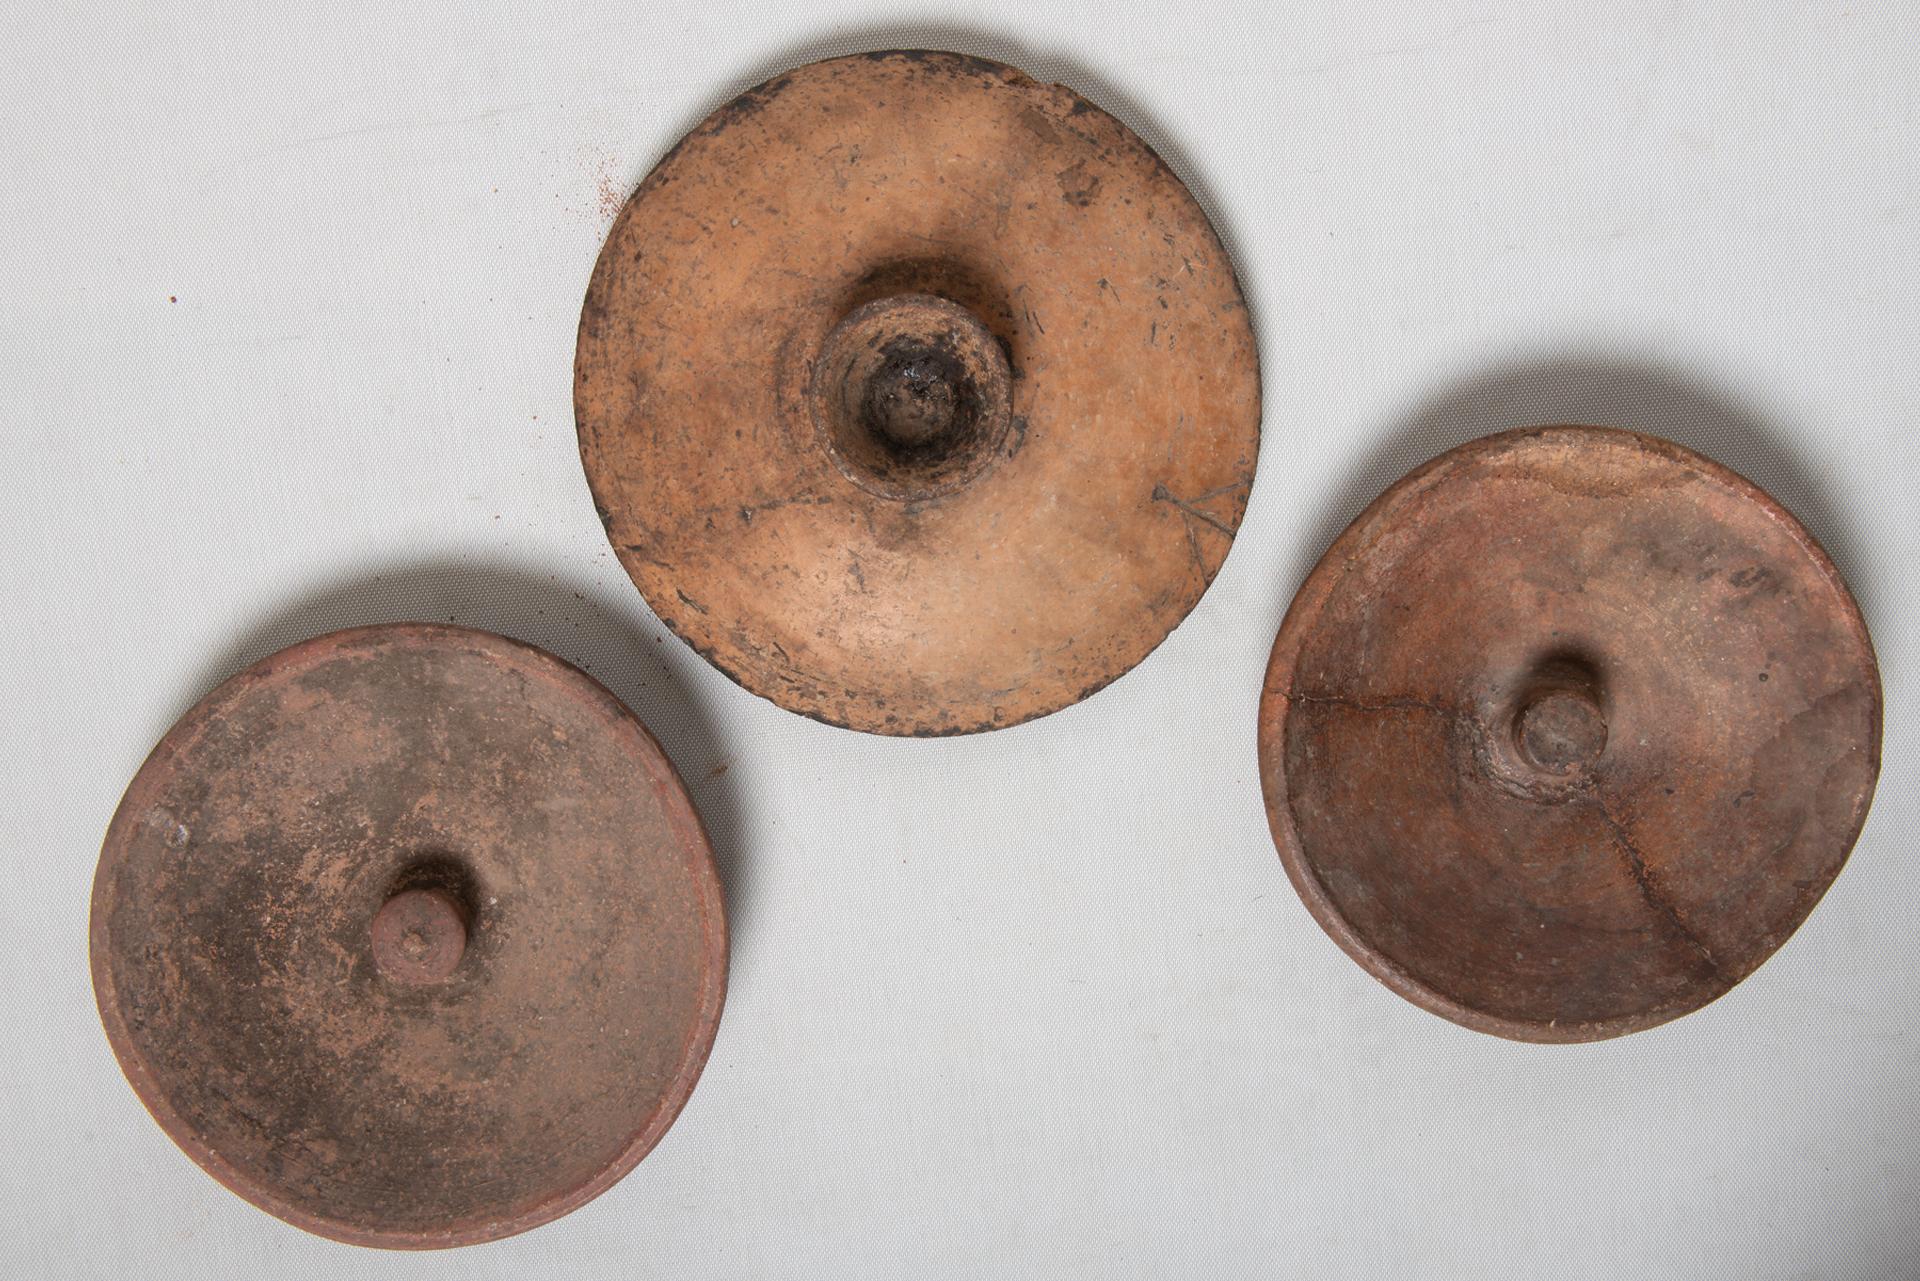 Berber Old Earthenware Bowls and Lids from Morocco For Sale 3